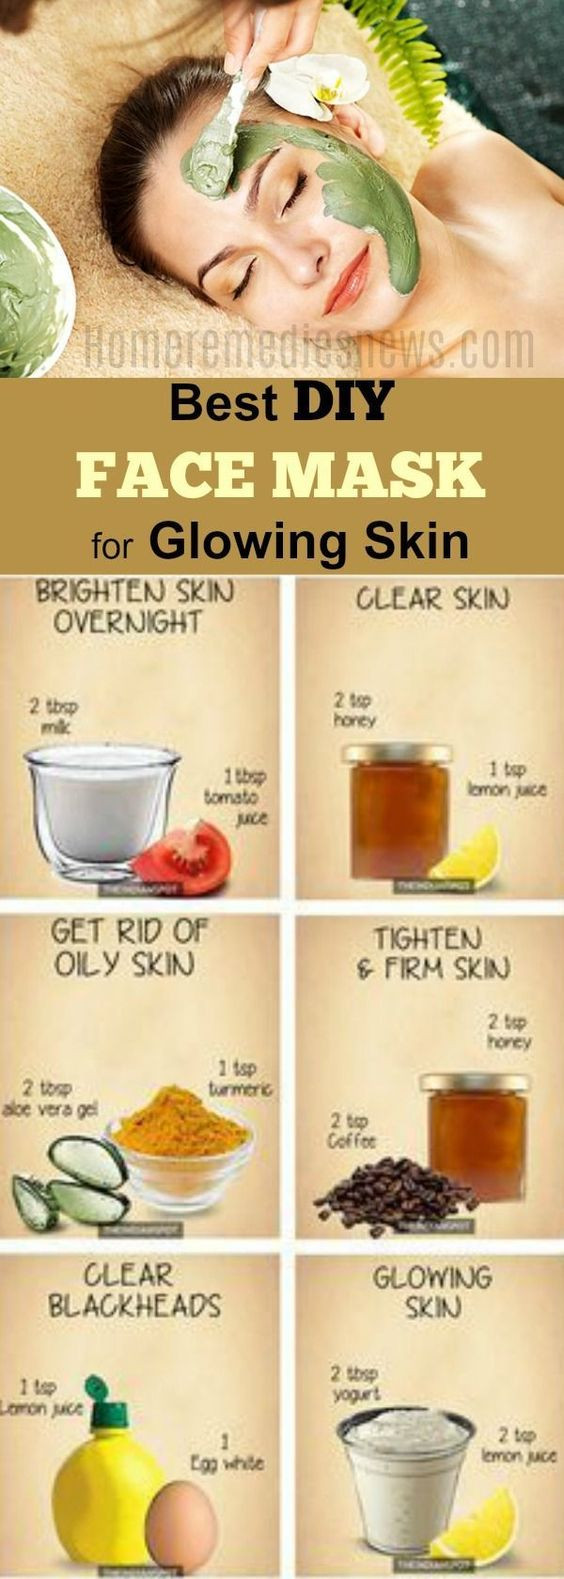 Acne Masks DIY
 5 Best DIY Face Mask for Acne Scars Anti Aging Glowing